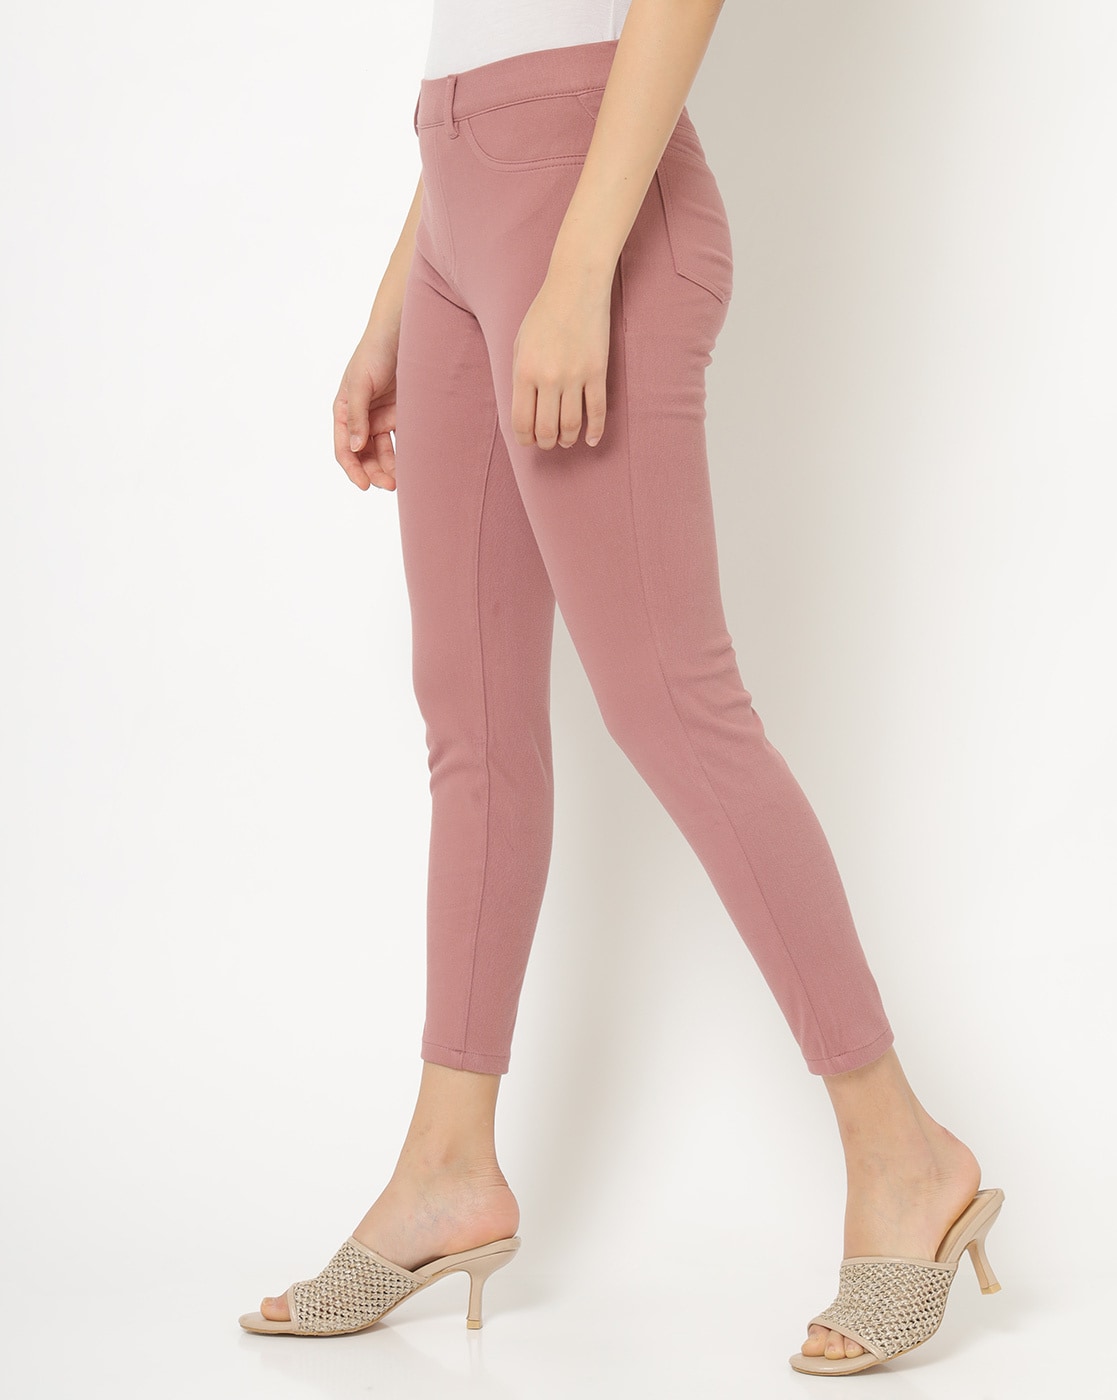 Buy Women Dusty Pink Pleated High Waist Wide Legged Trousers  Palazzos  Online India  FabAlley